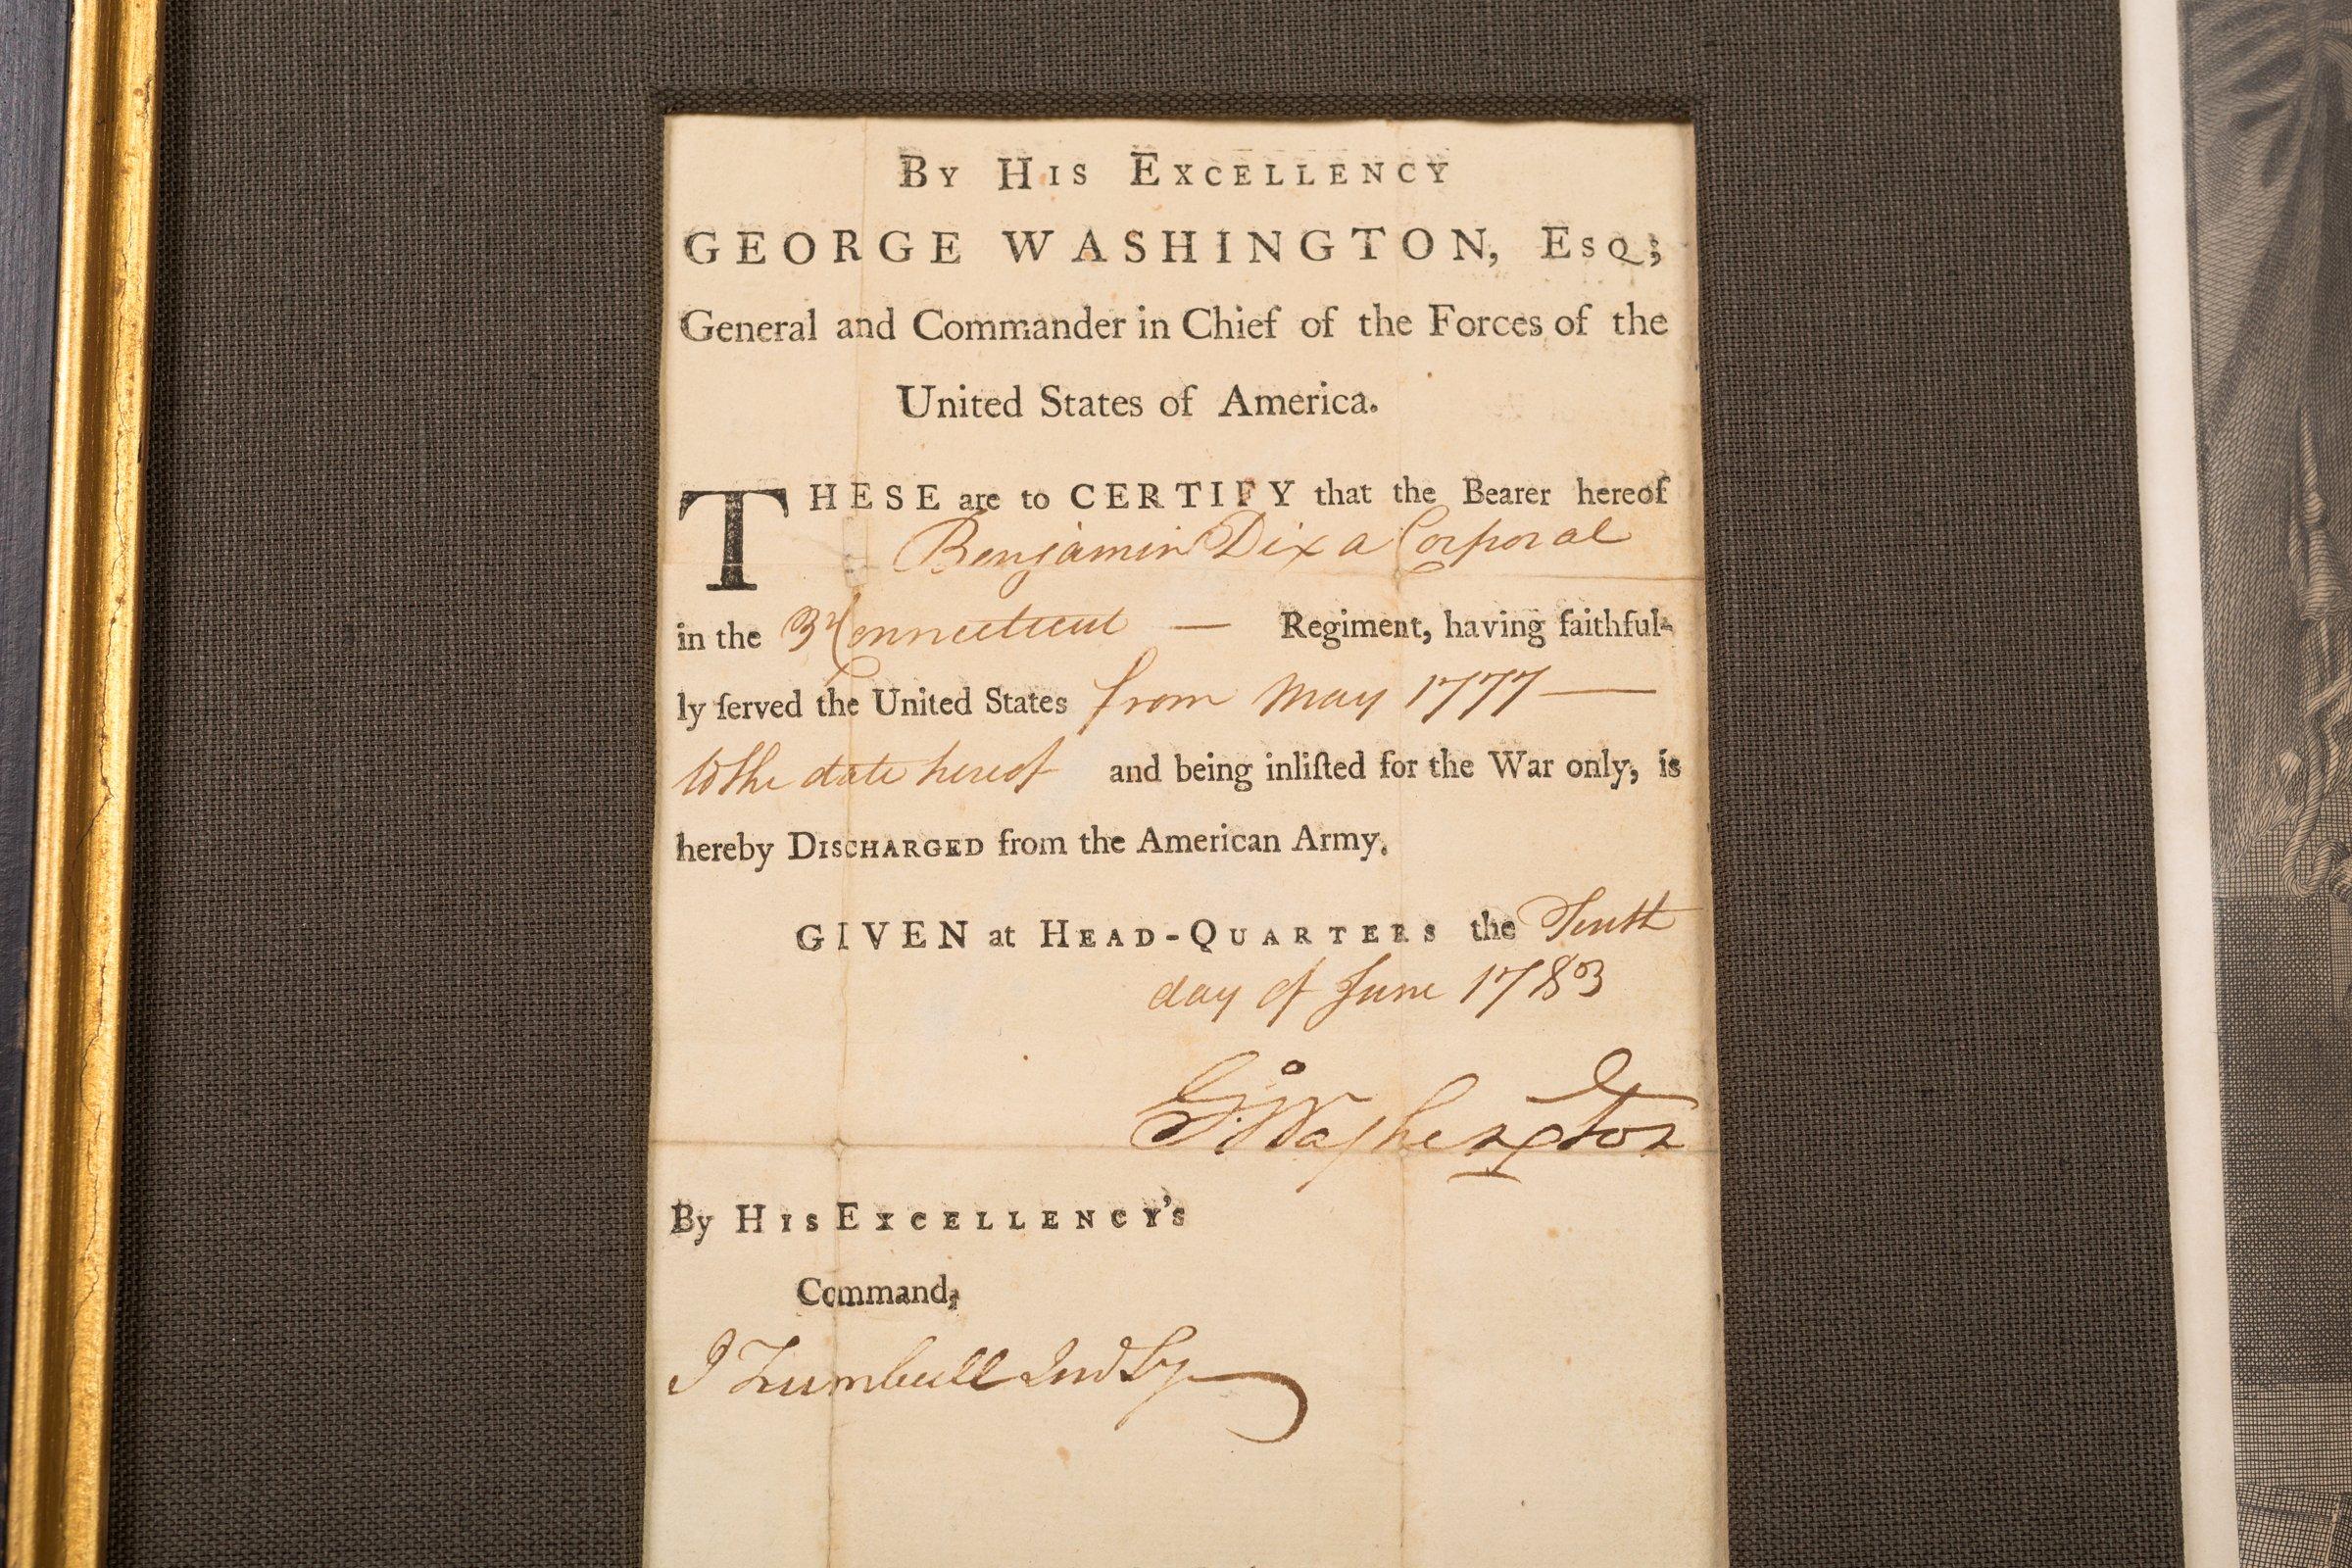 Presented is a Revolutionary War discharge document for Corporal Benjamin Dix, signed by General George Washington, and dated June 10, 1783. Corporal Dix served in the 3rd Connecticut Regiment for 